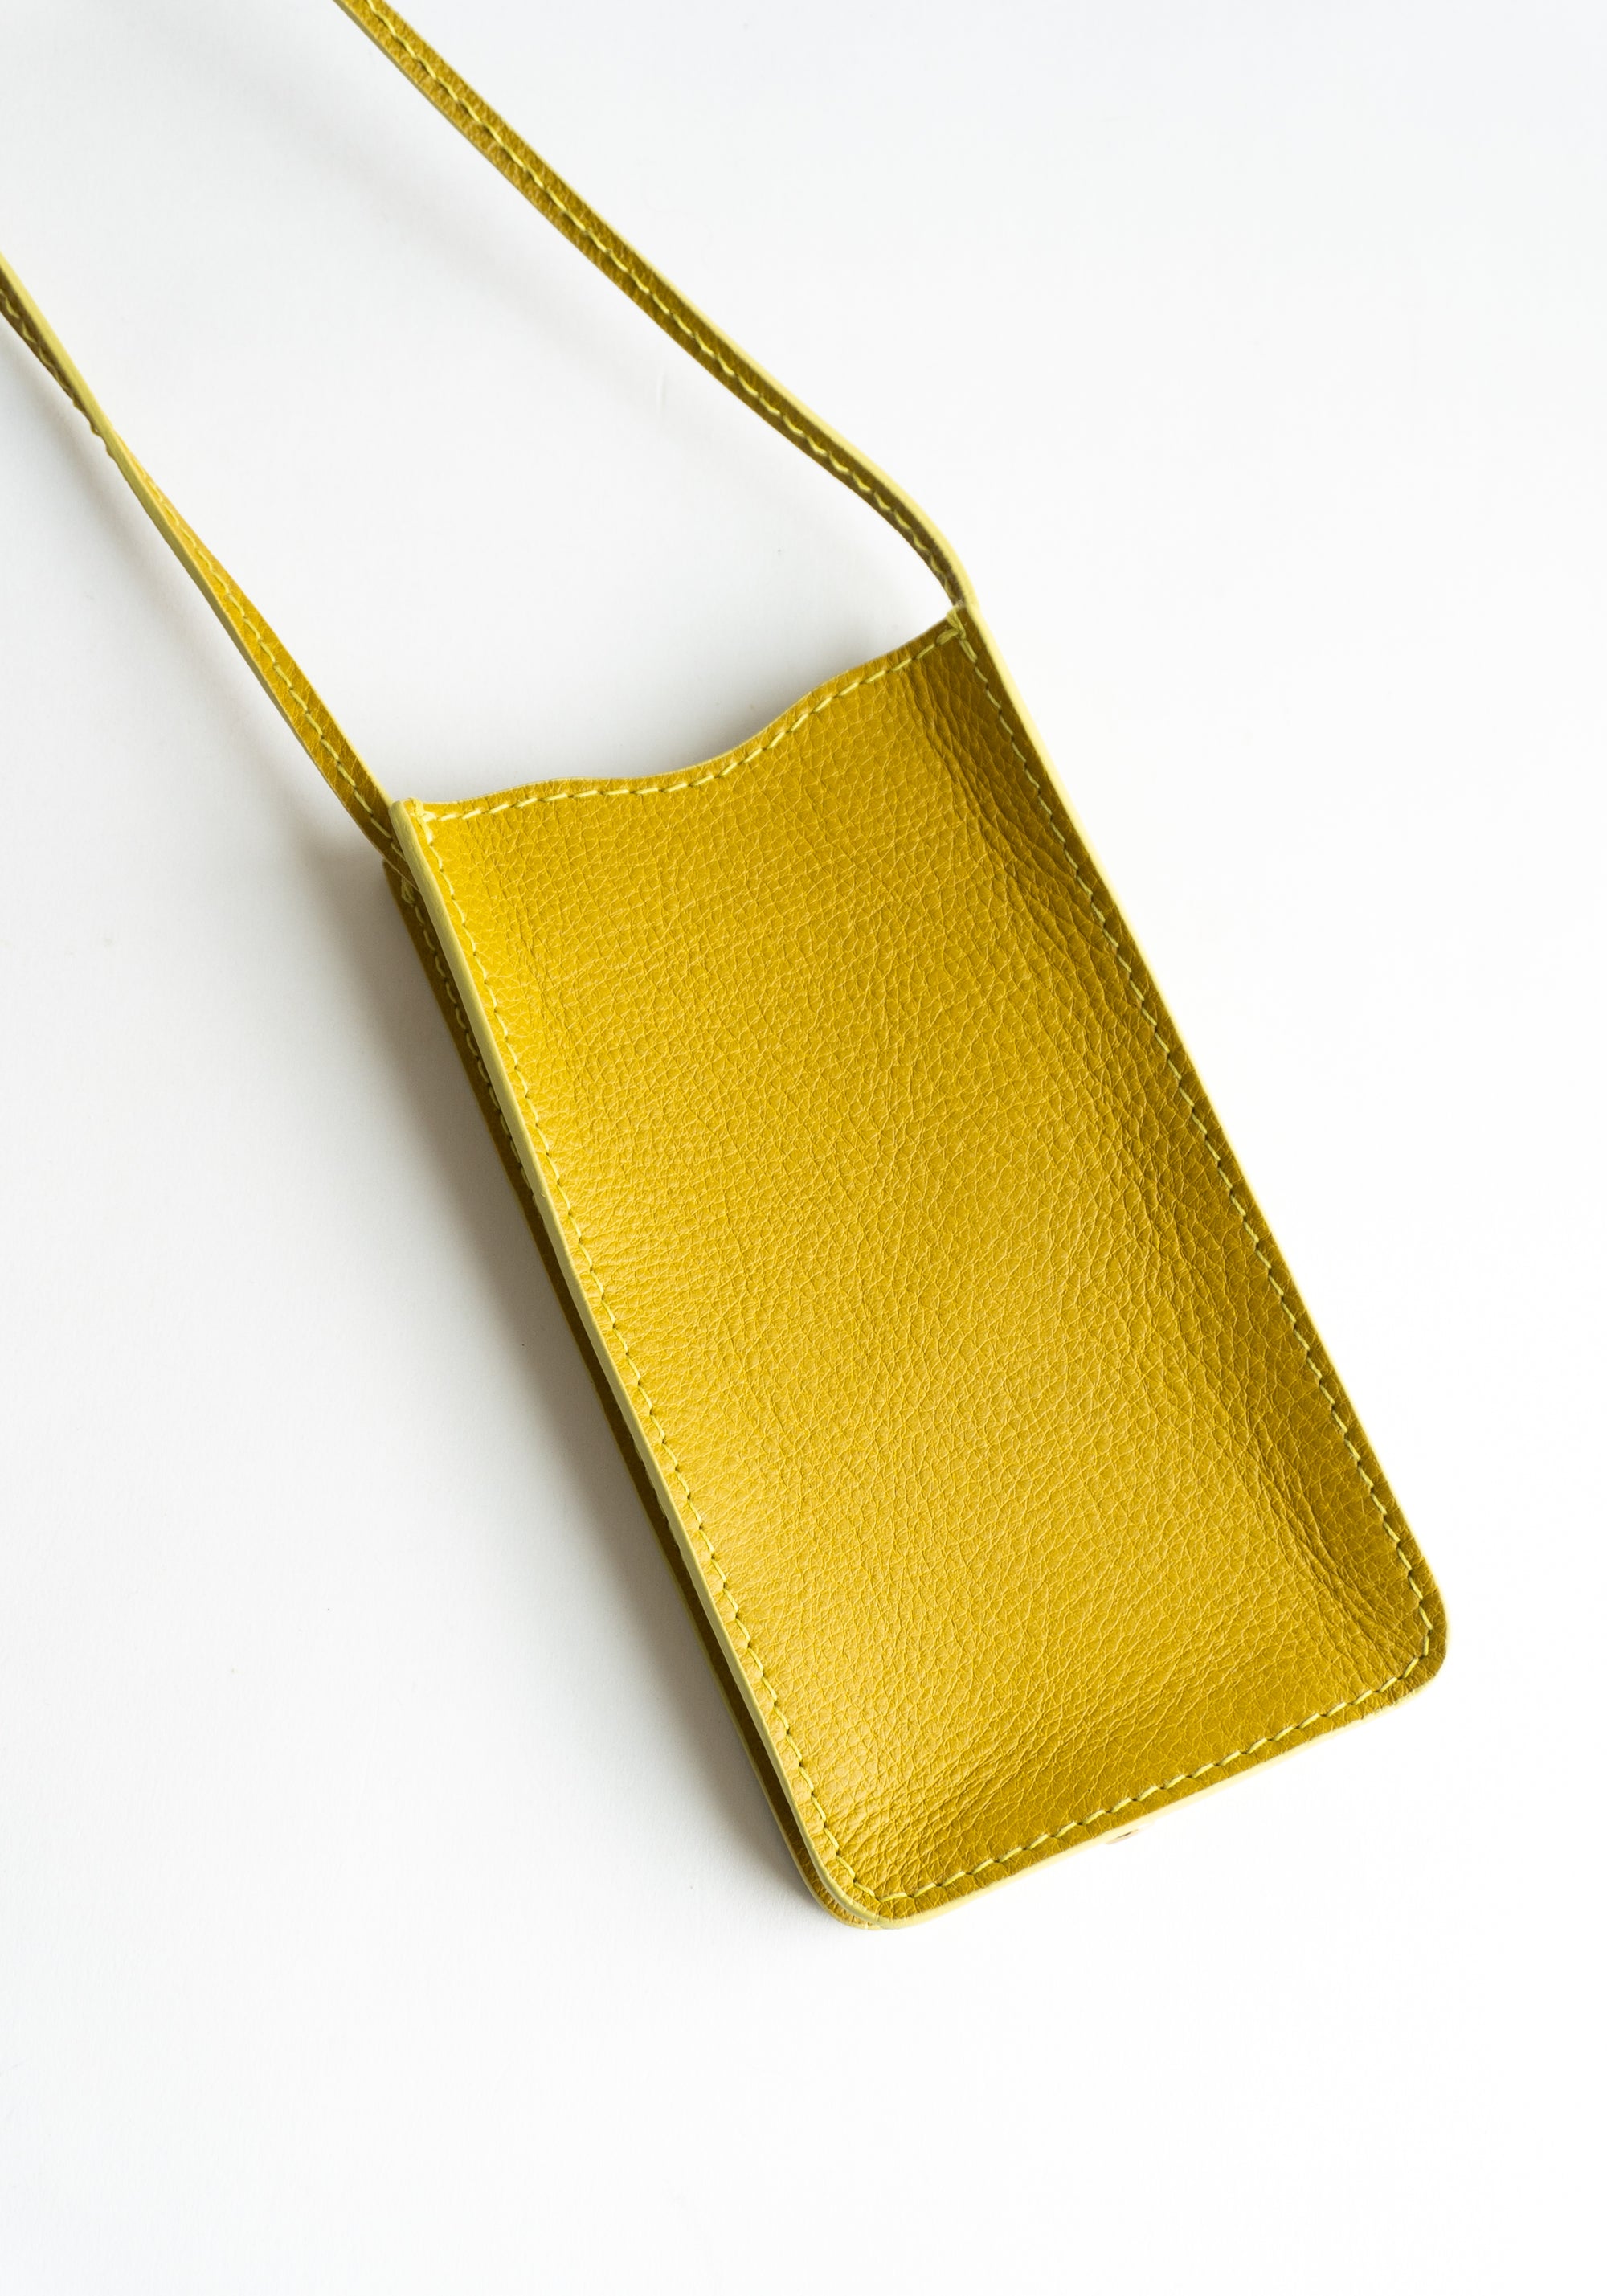 Lindquist Pal Bag in Chartreuse